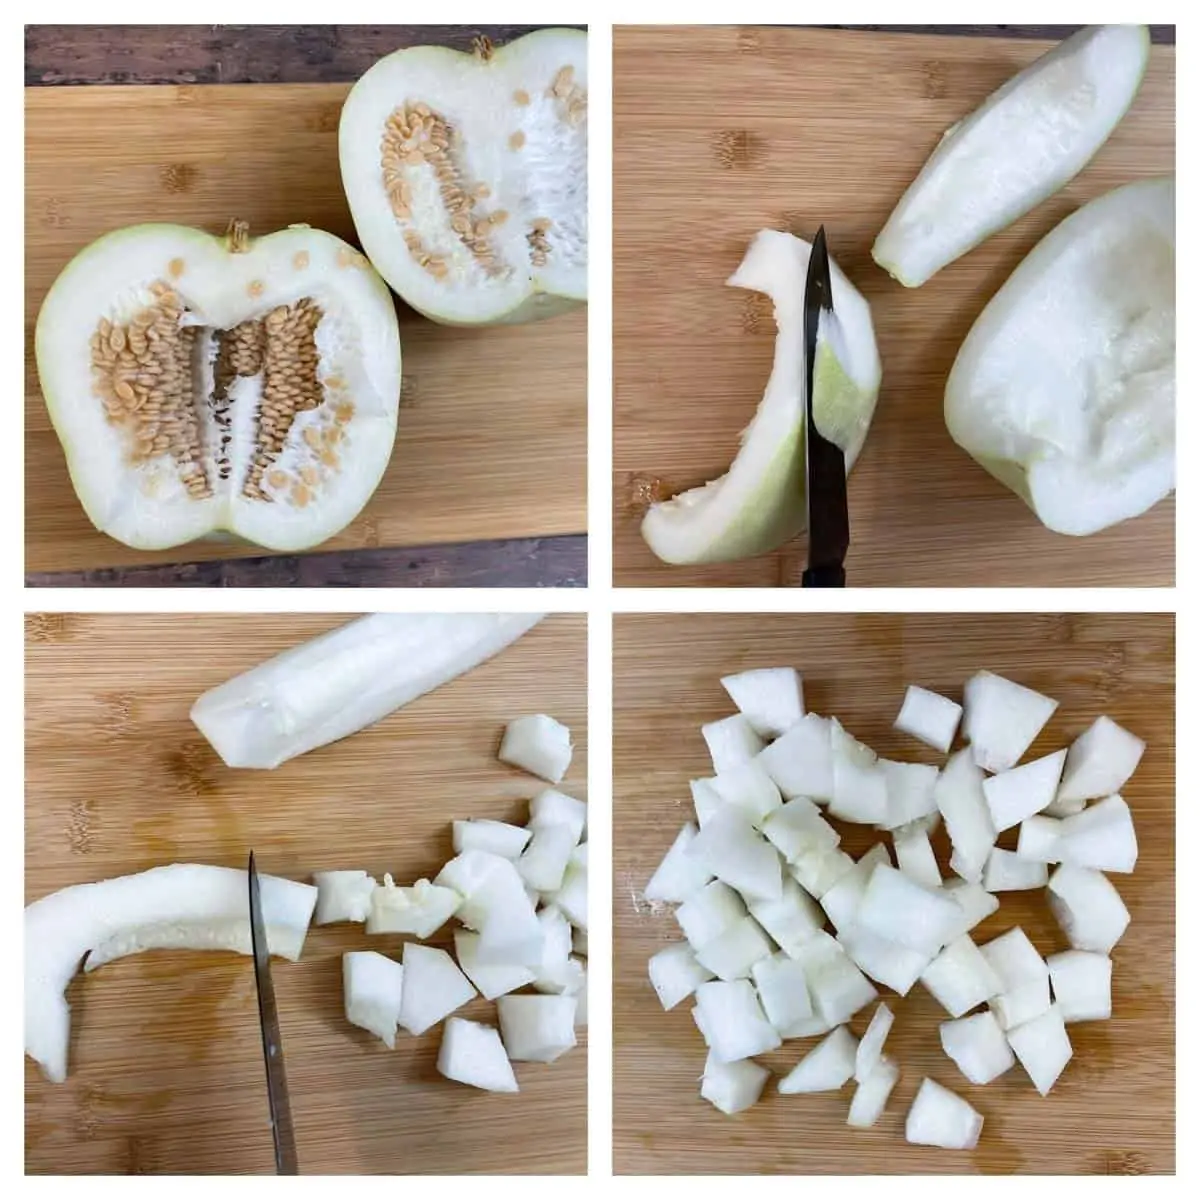 step to clean, cut and chop the winter melon in to cubes collage